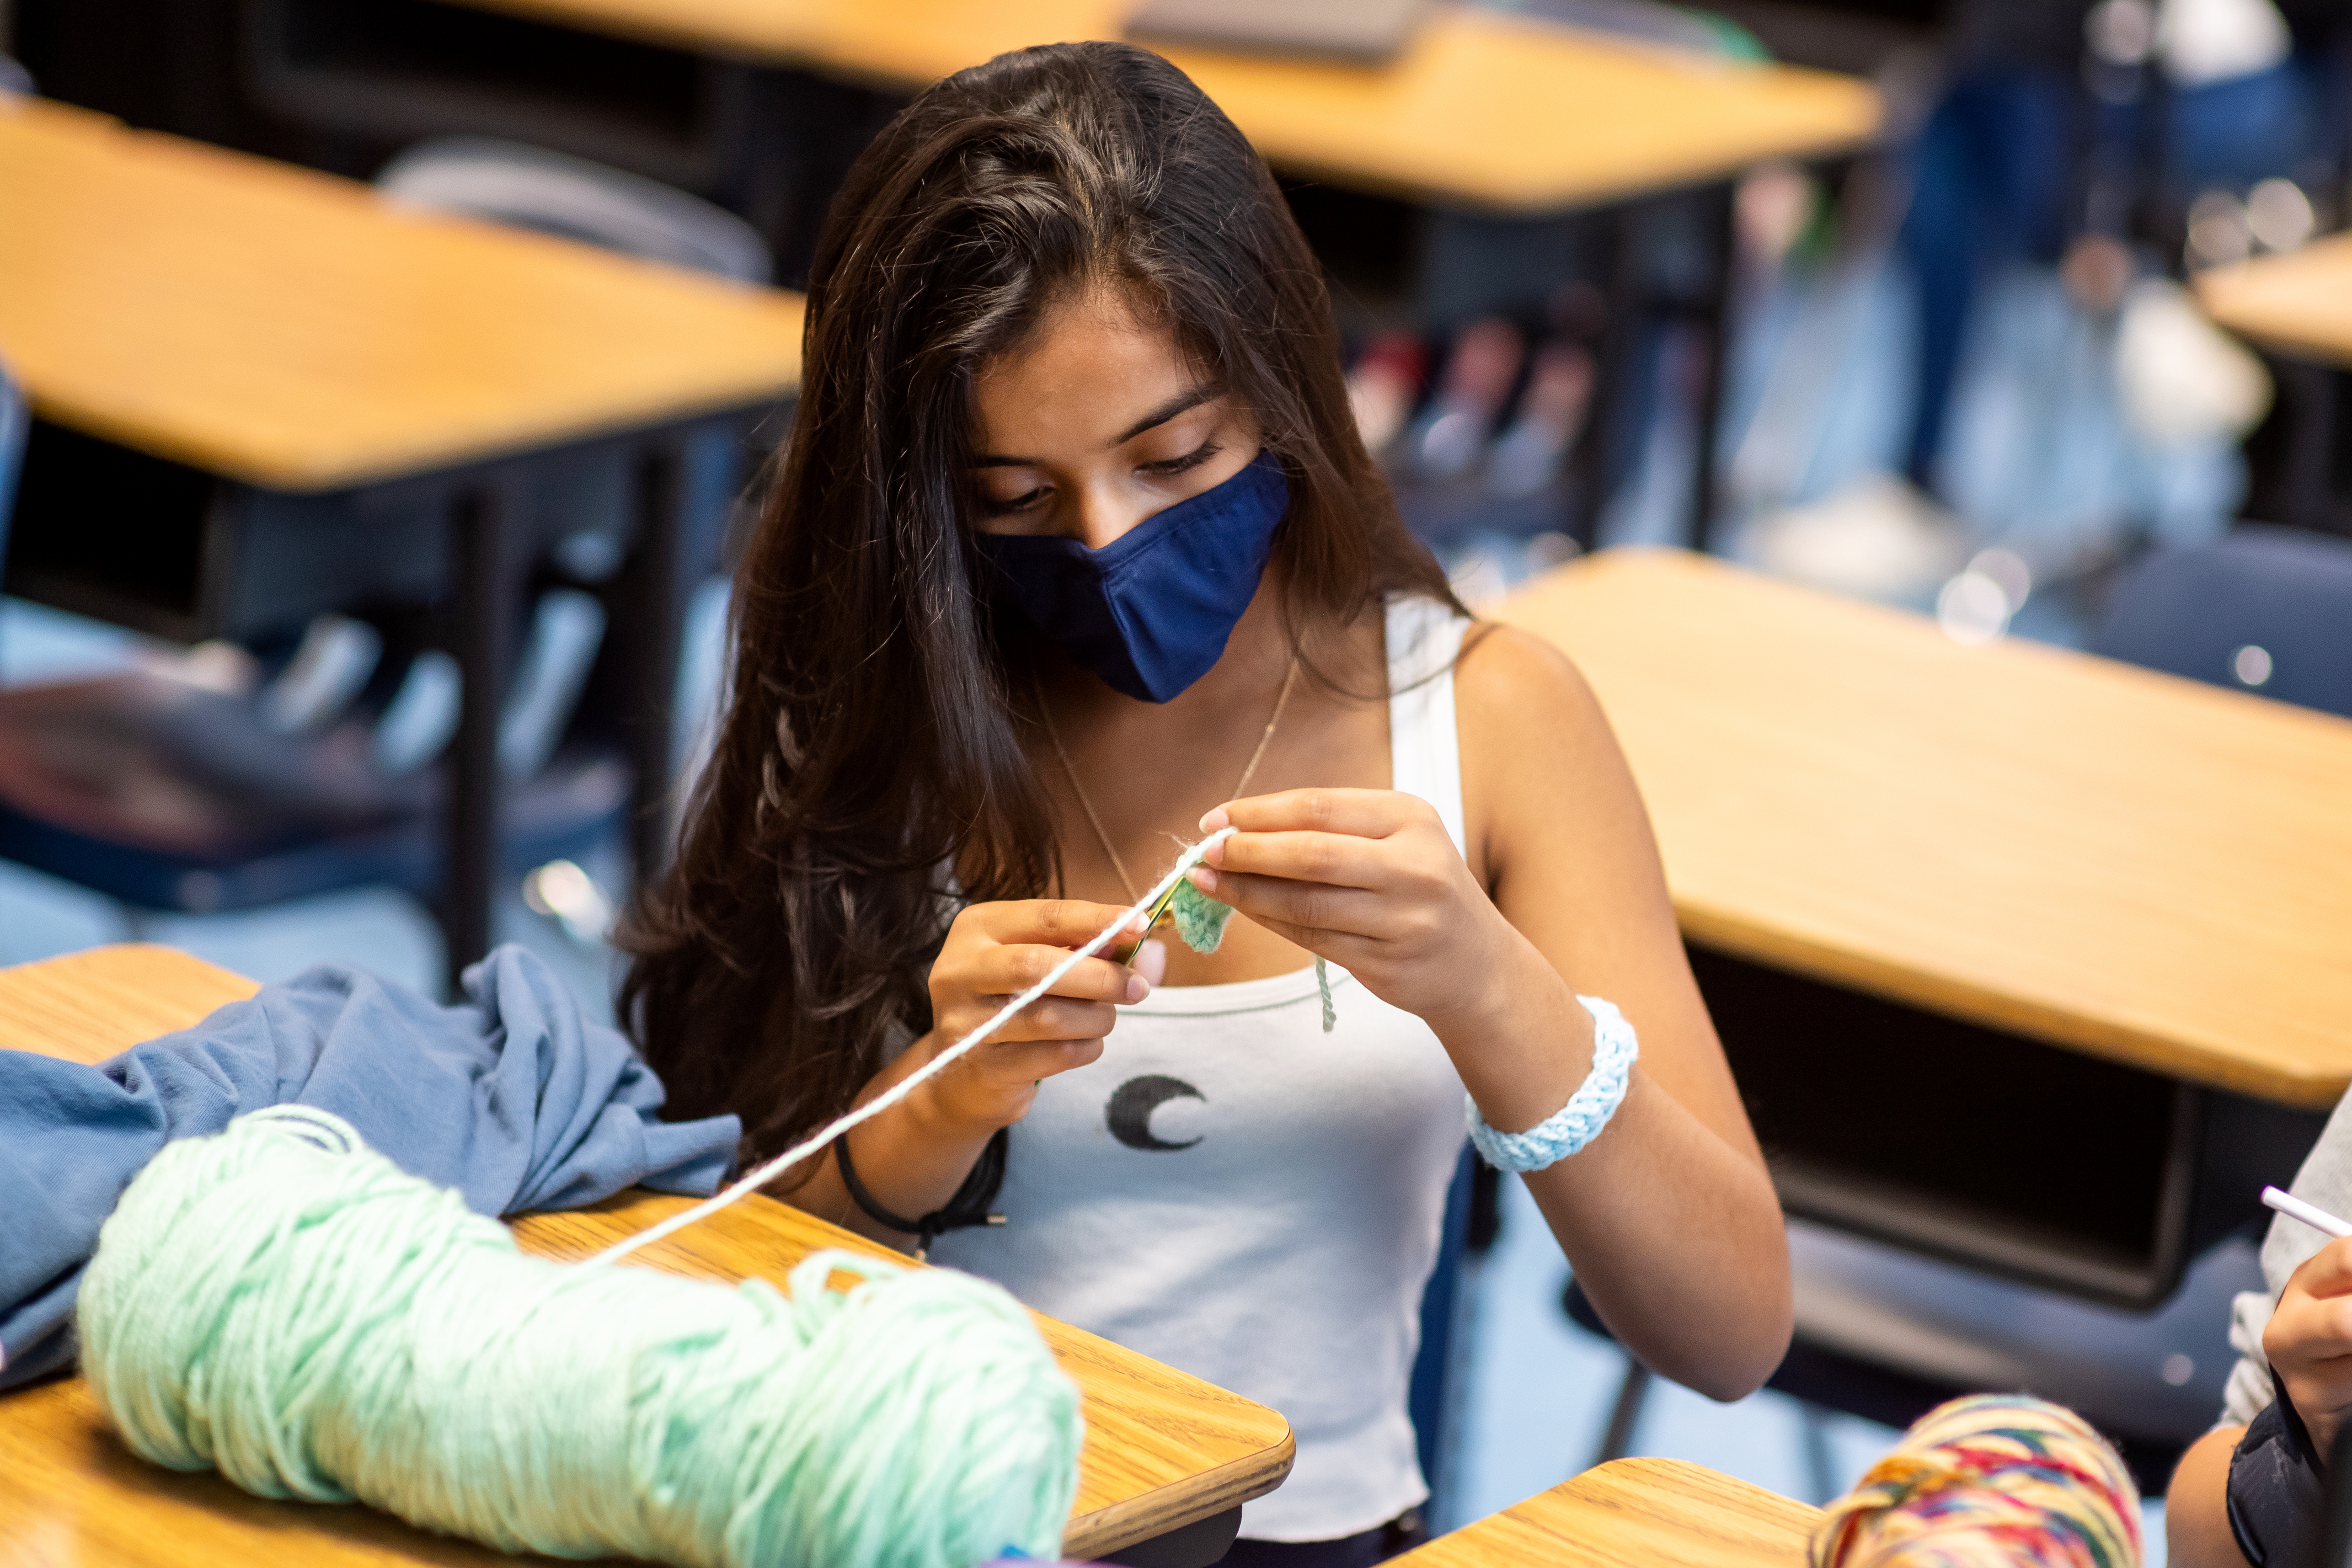 A Katherine Johnson middle school student is learning to knit as part of a social-emotional learning time period intended to help students build relationships with staff and pursue enrichment activities.